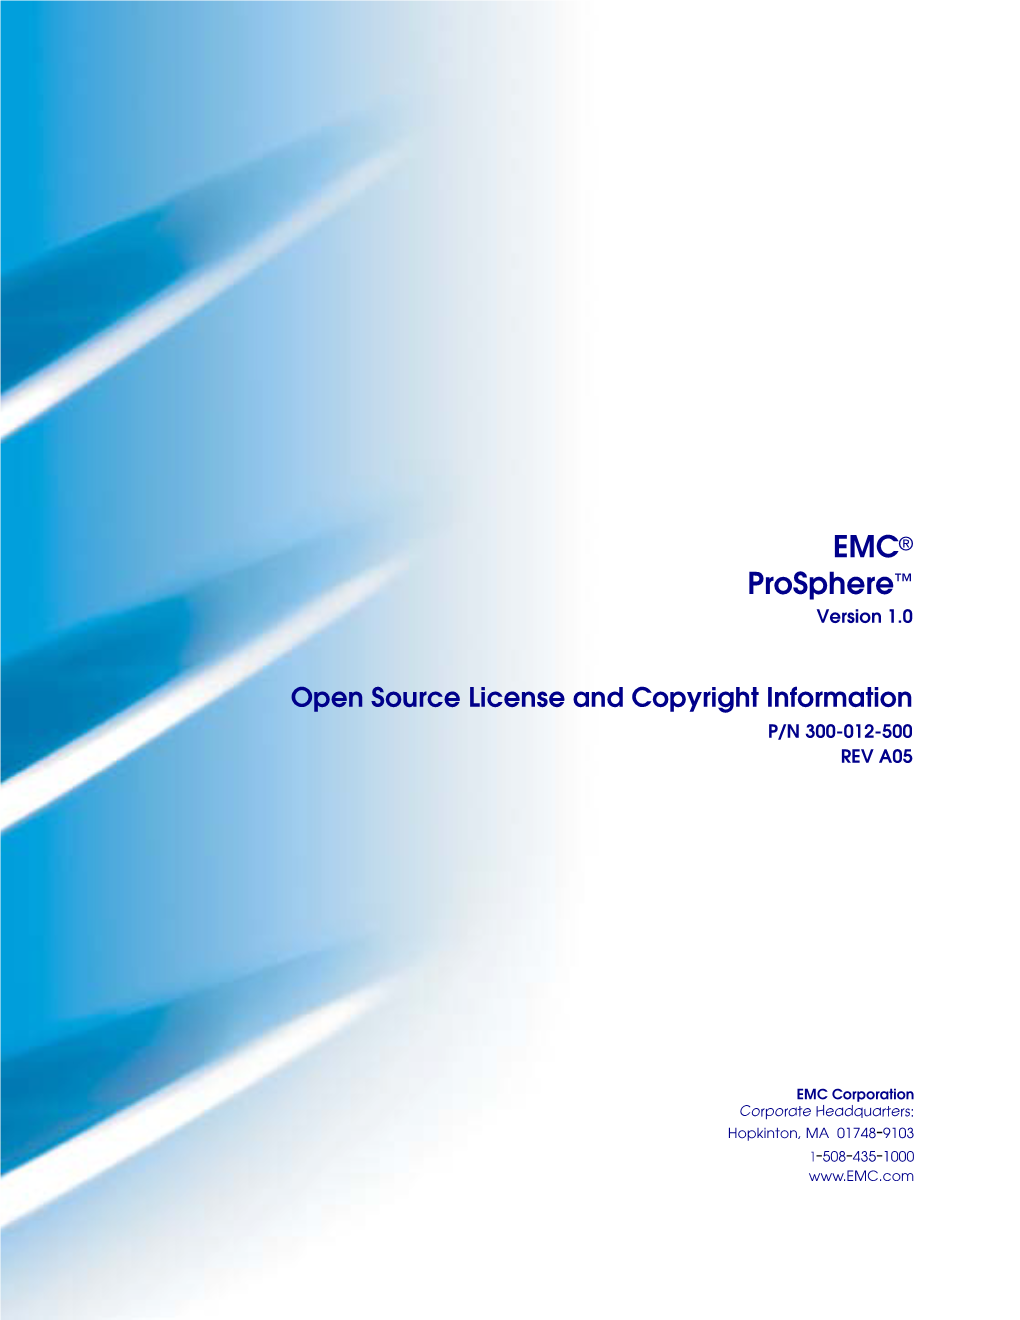 EMC Prosphere Open Source License and Copyright Information Contents